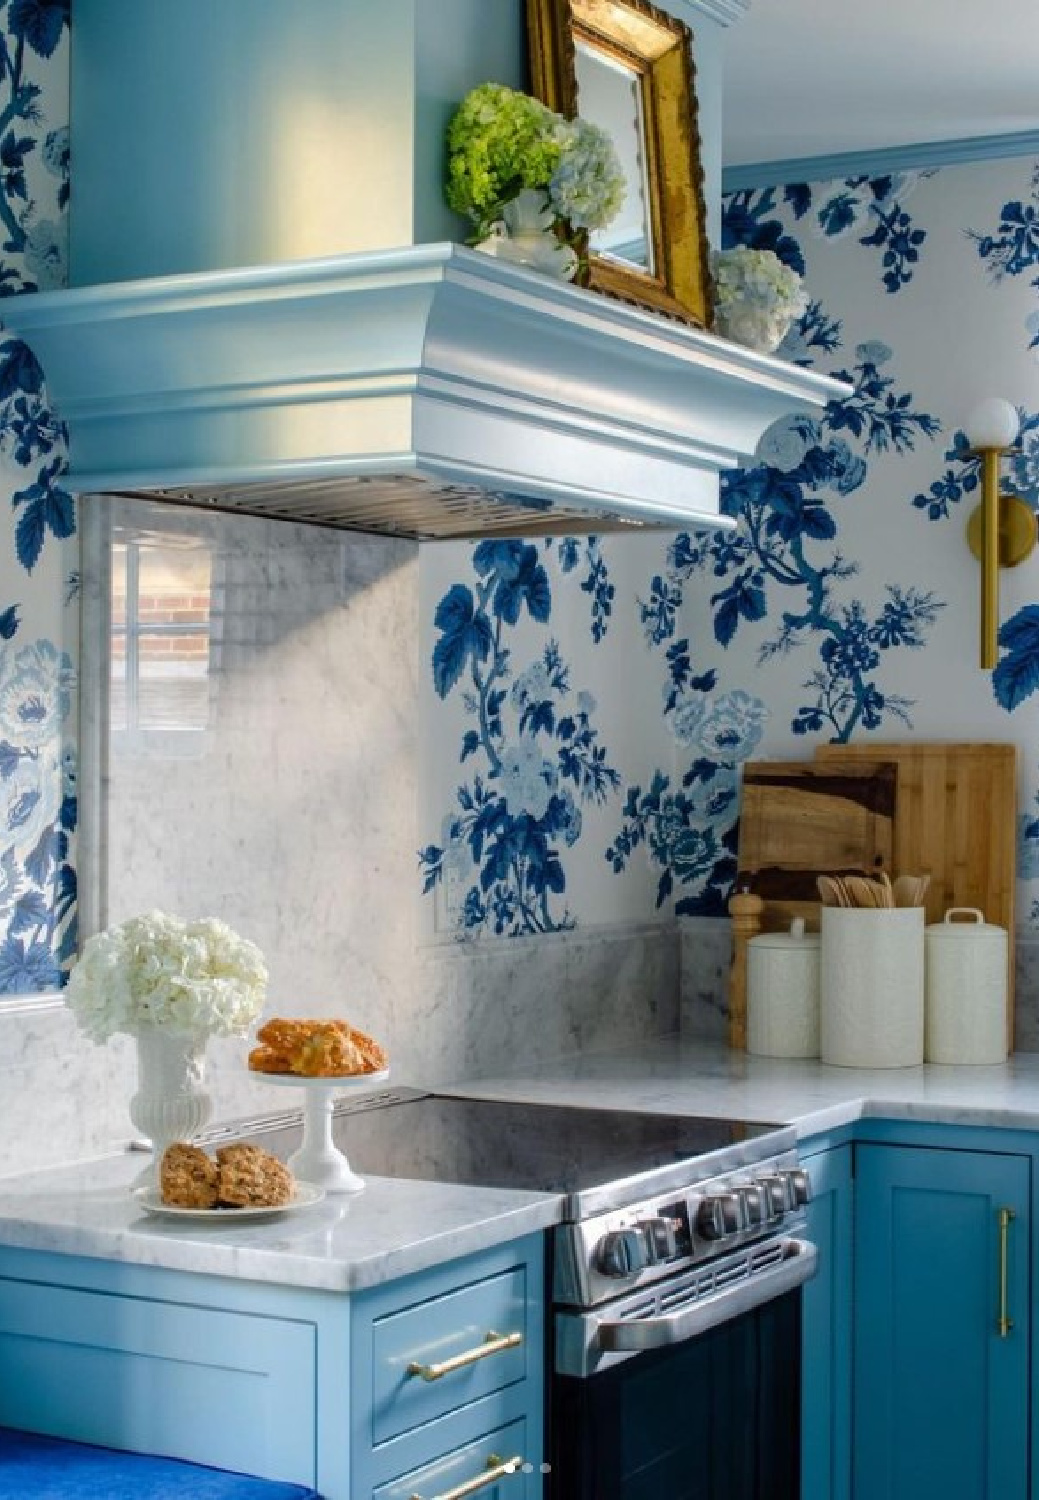 Charming turquoise blue kitchen cabinets and range hood with blue floral wallpaper - Shannon Meyer Roberts. #bluekitchens #turquoisecabinets